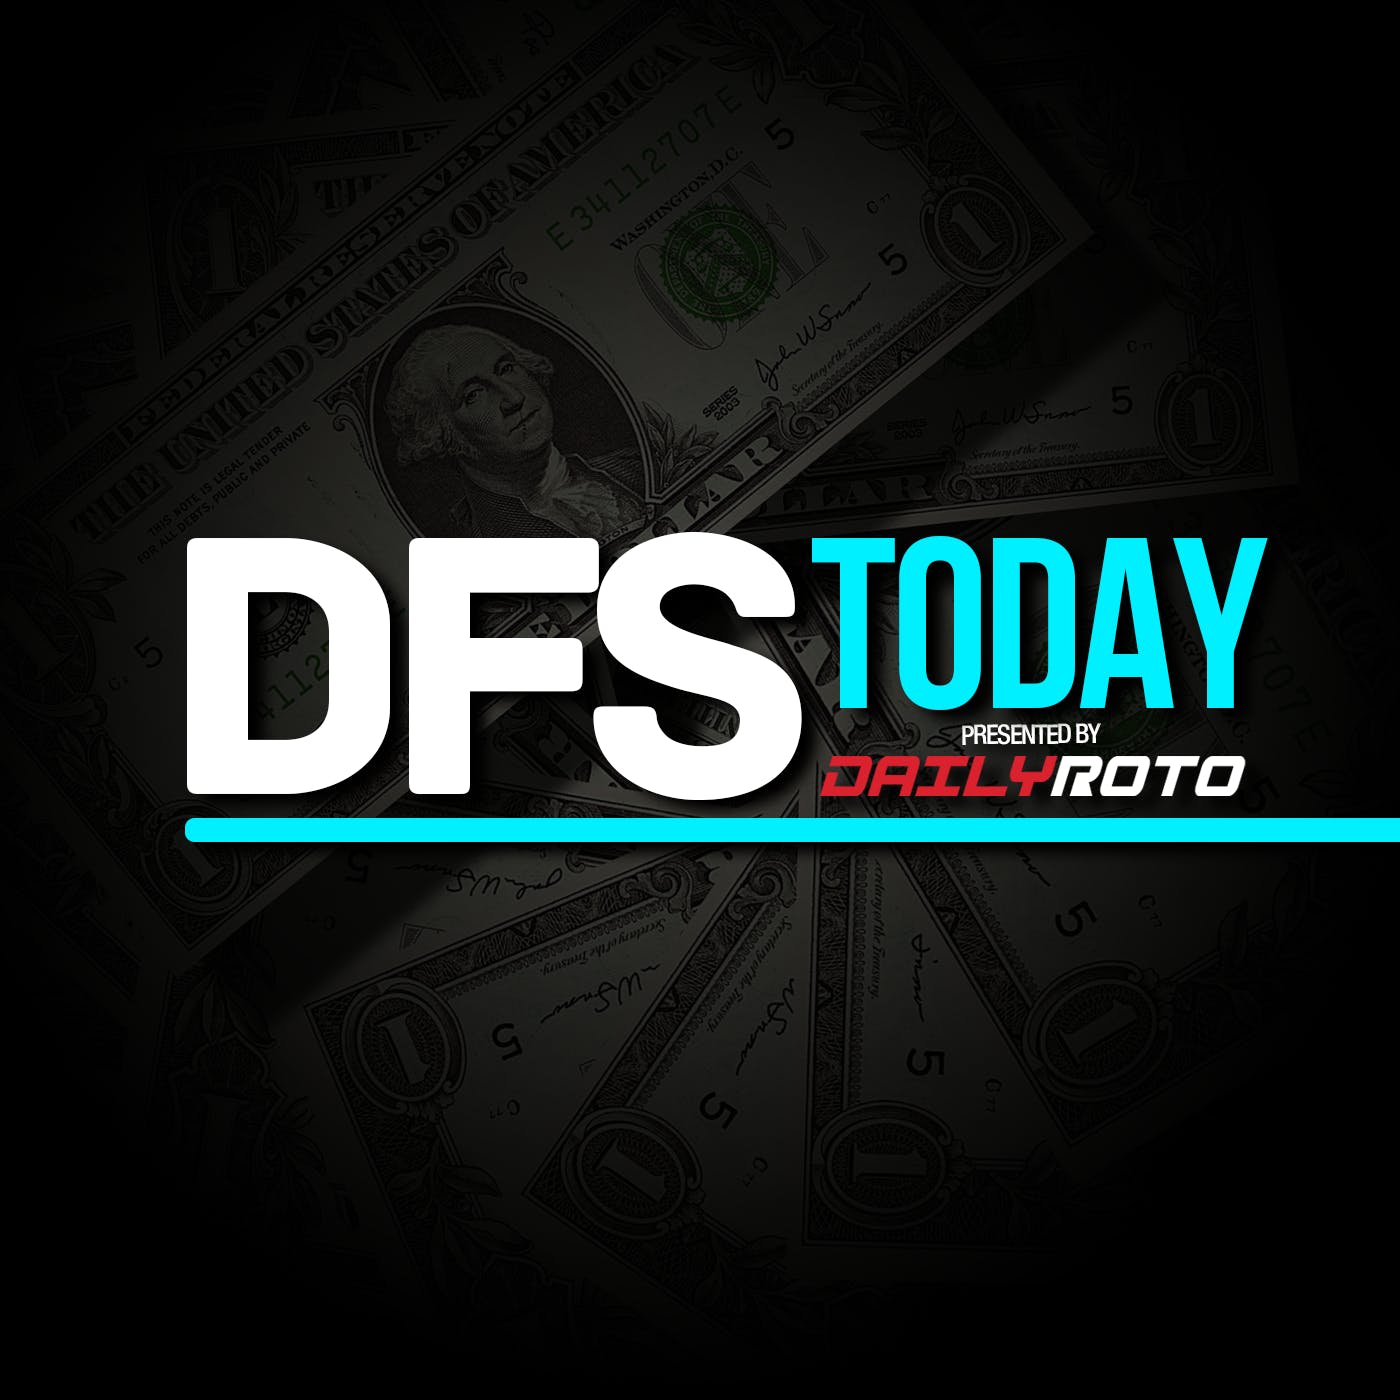 7/23 DailyRoto Hour: World Series predictions, top lineups, DFS plays, and more...